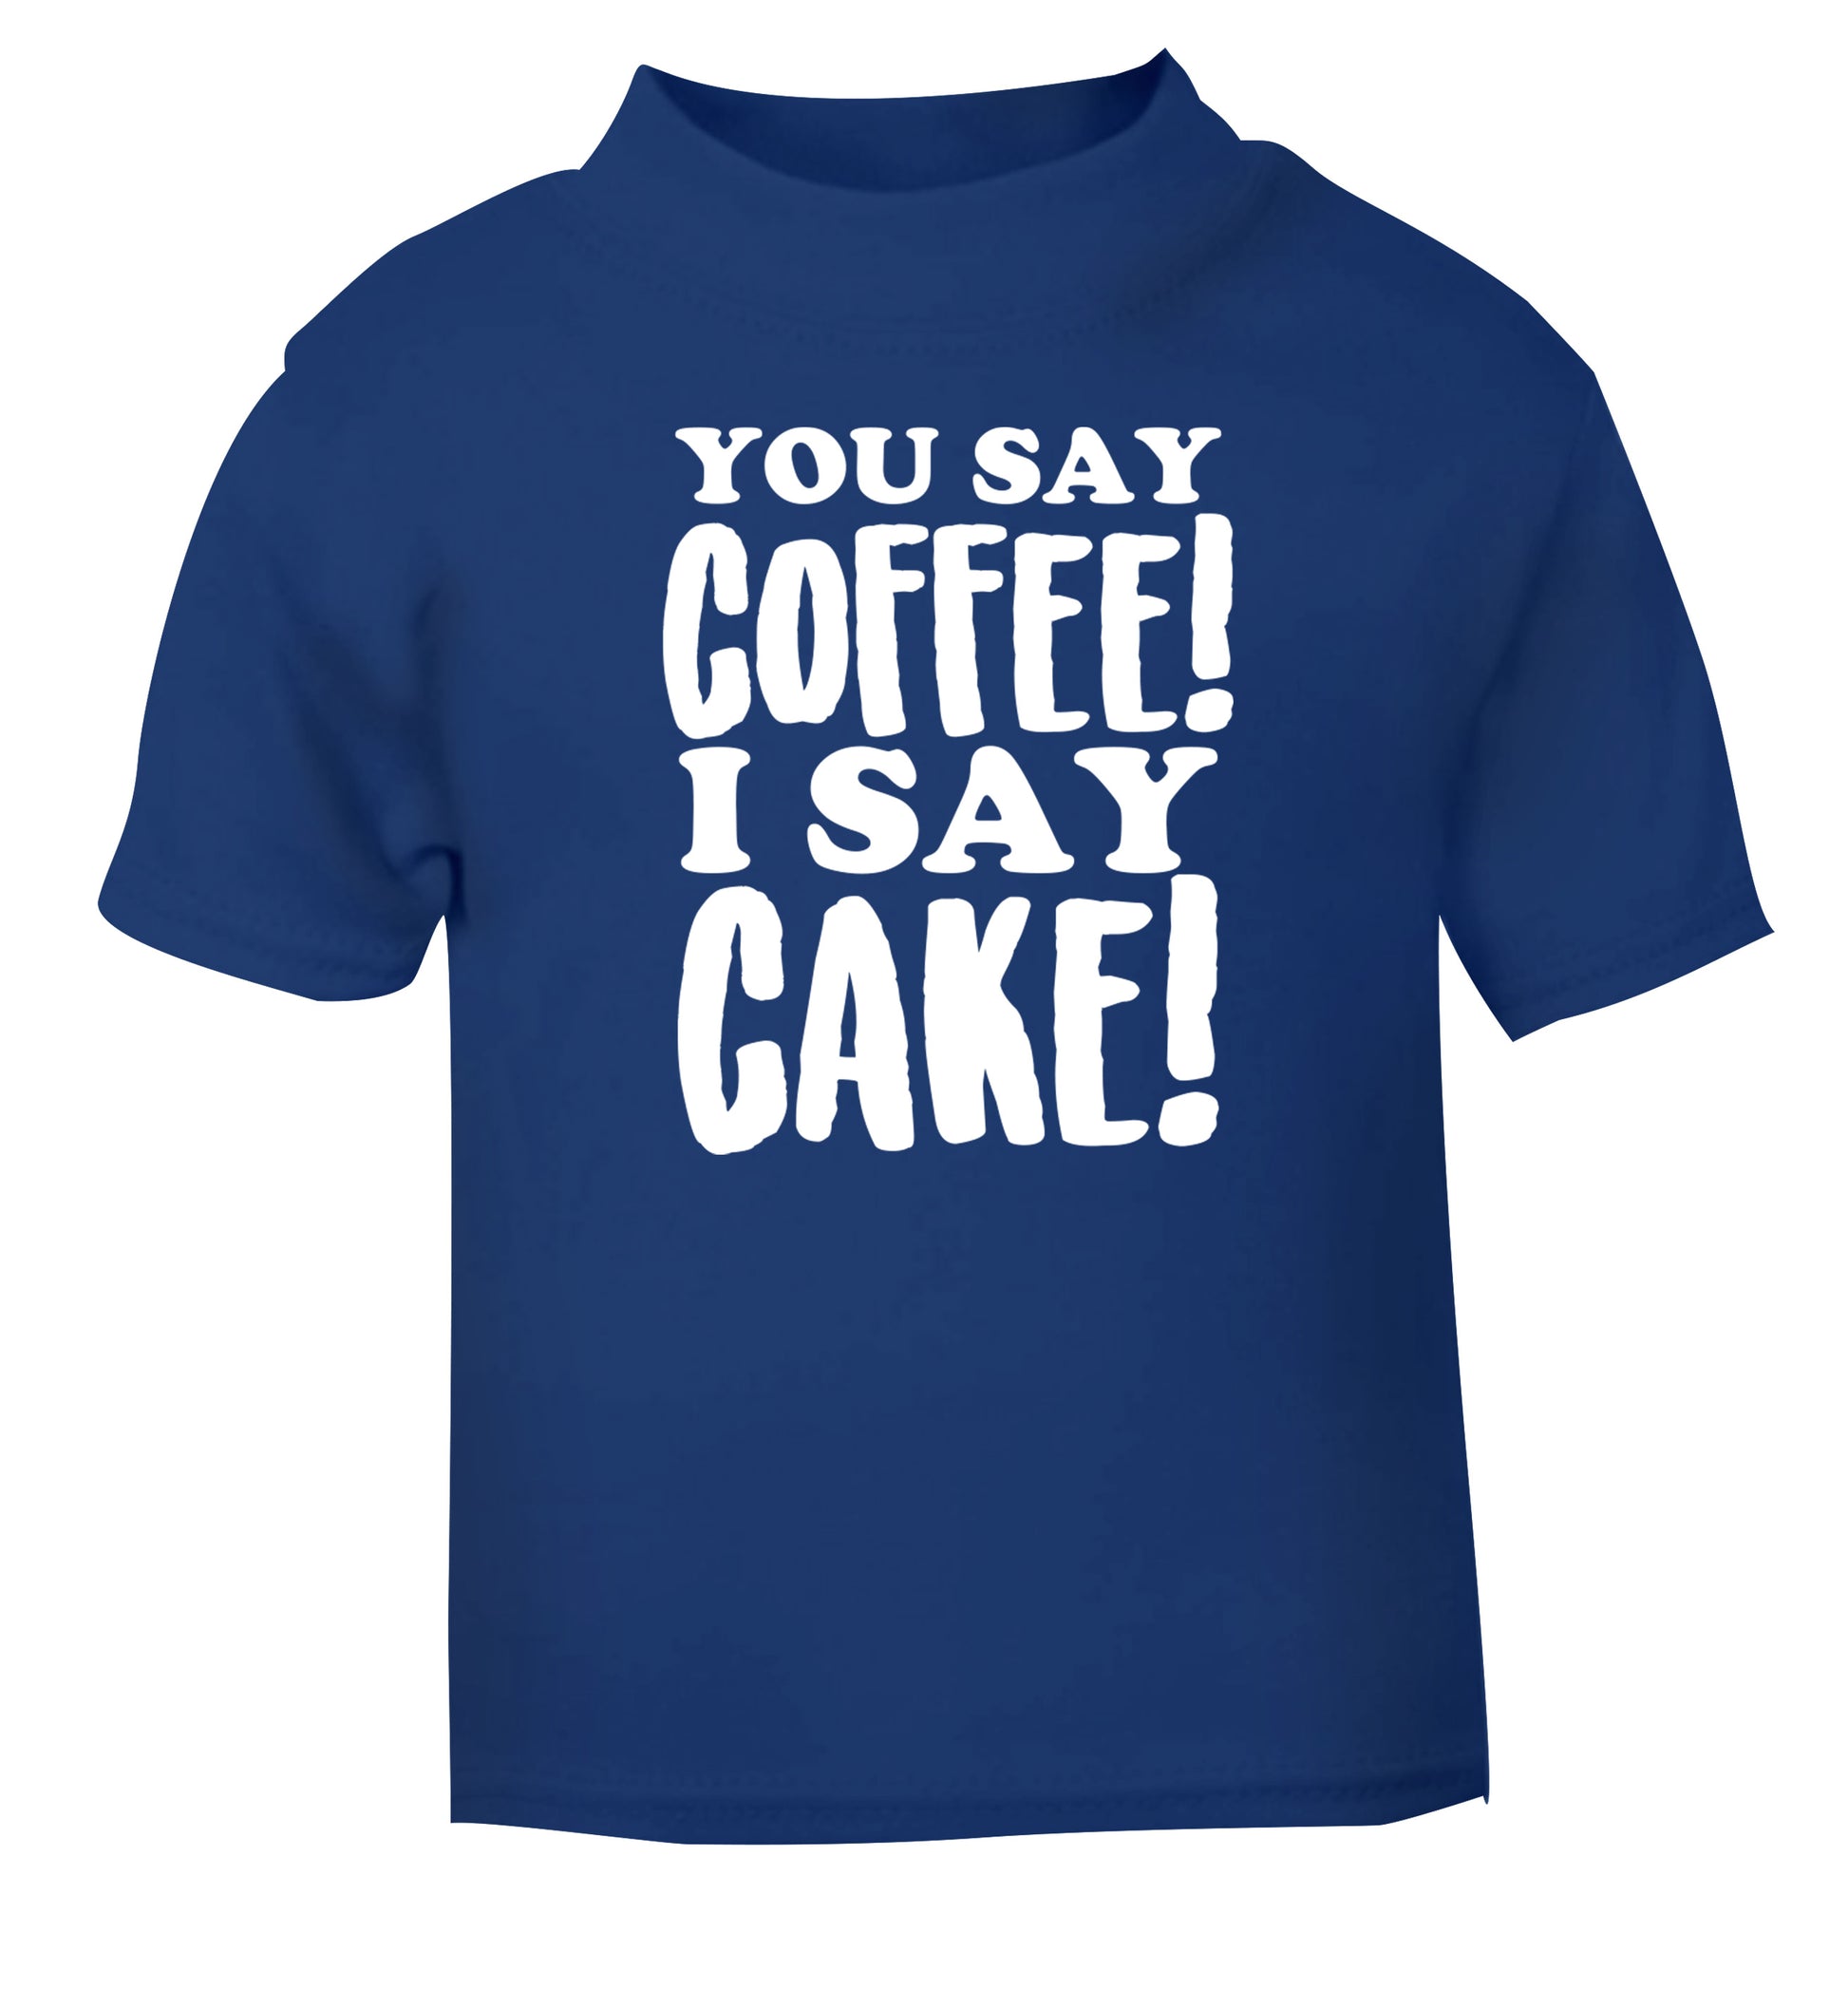 You say coffee I say cake! blue Baby Toddler Tshirt 2 Years